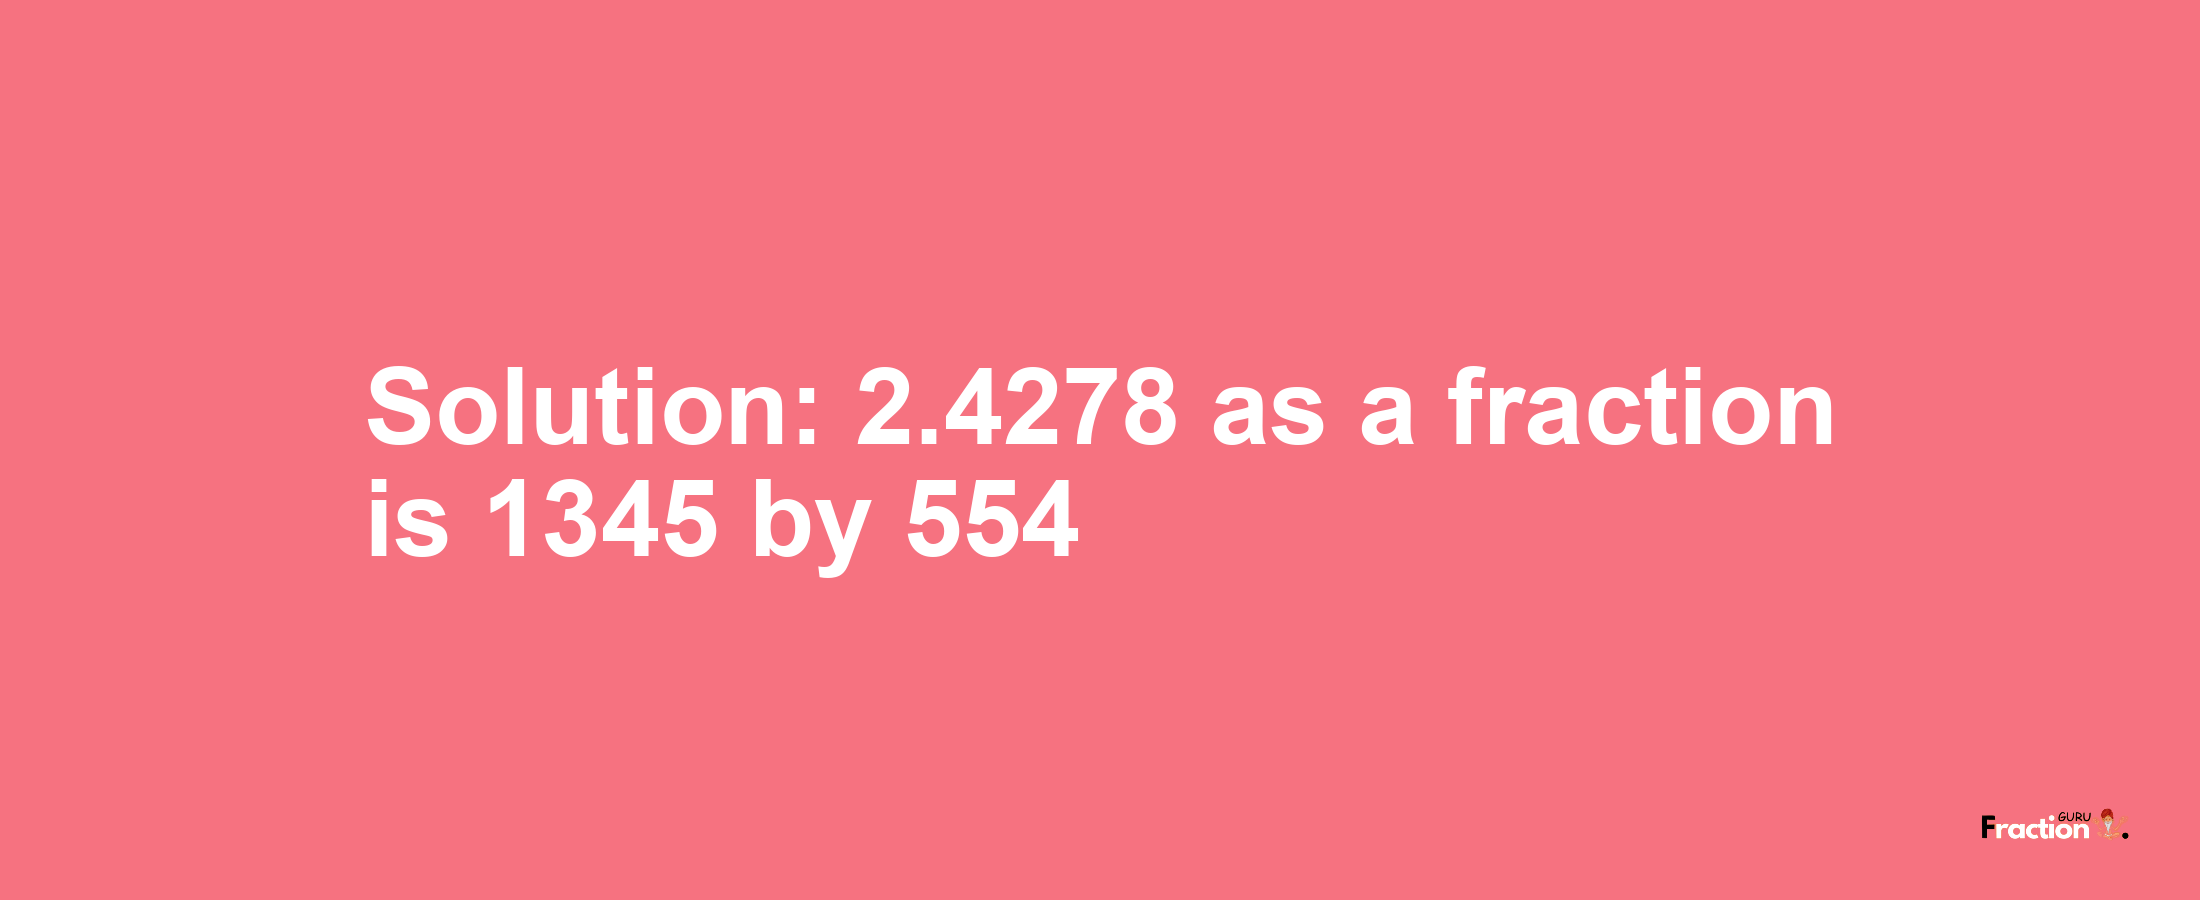 Solution:2.4278 as a fraction is 1345/554